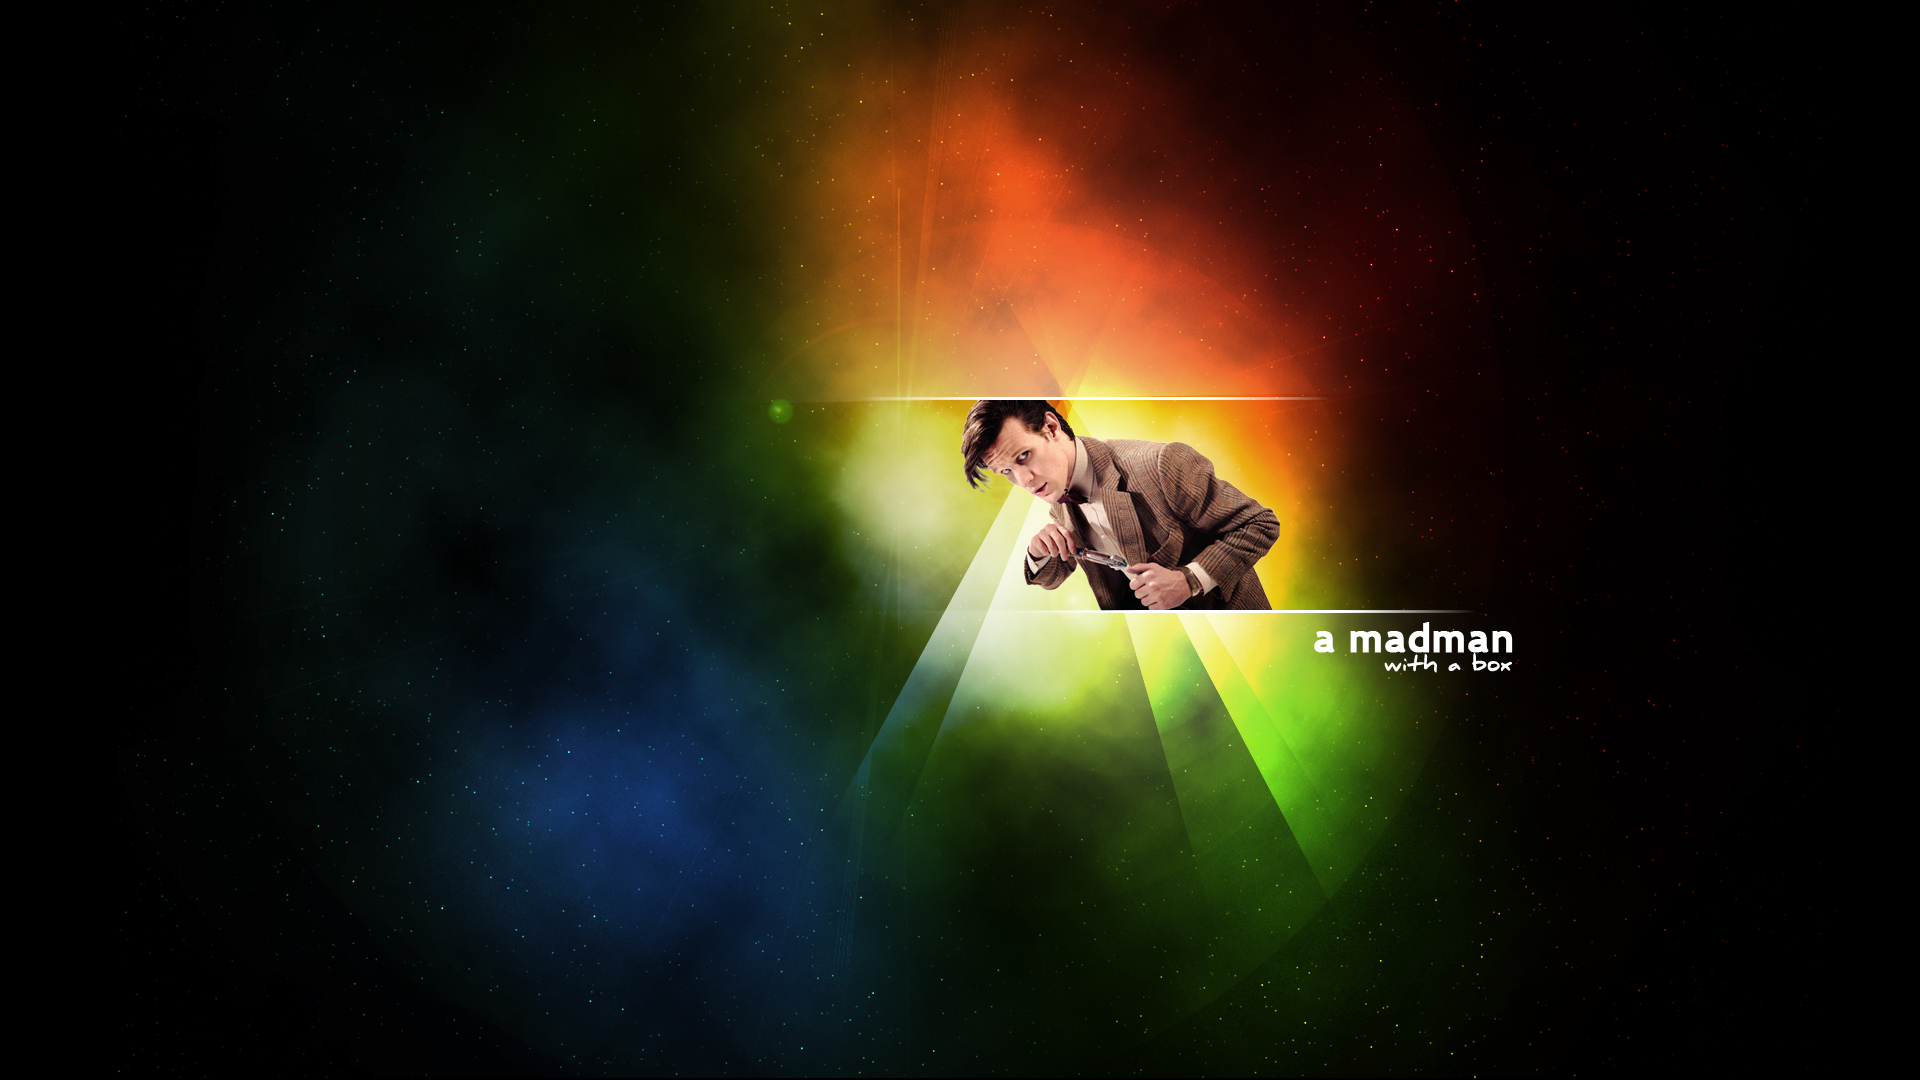 outer space, text, Matt Smith, rainbows, Eleventh Doctor, Doctor Who - desktop wallpaper